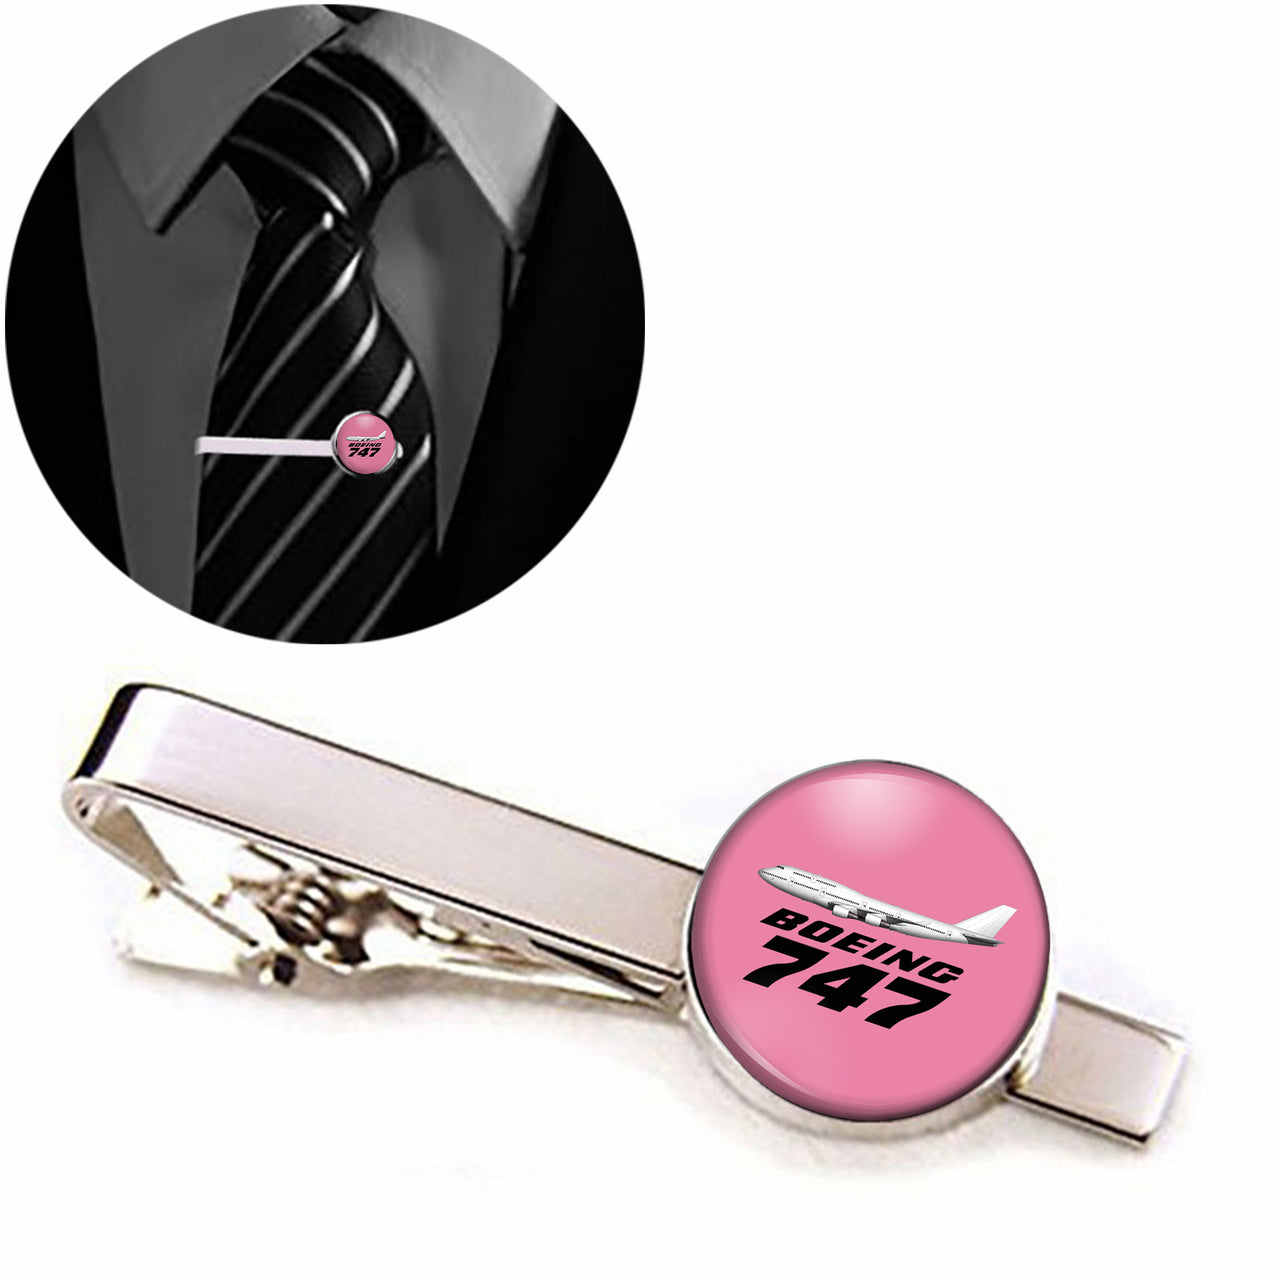 The Boeing 747 Designed Tie Clips